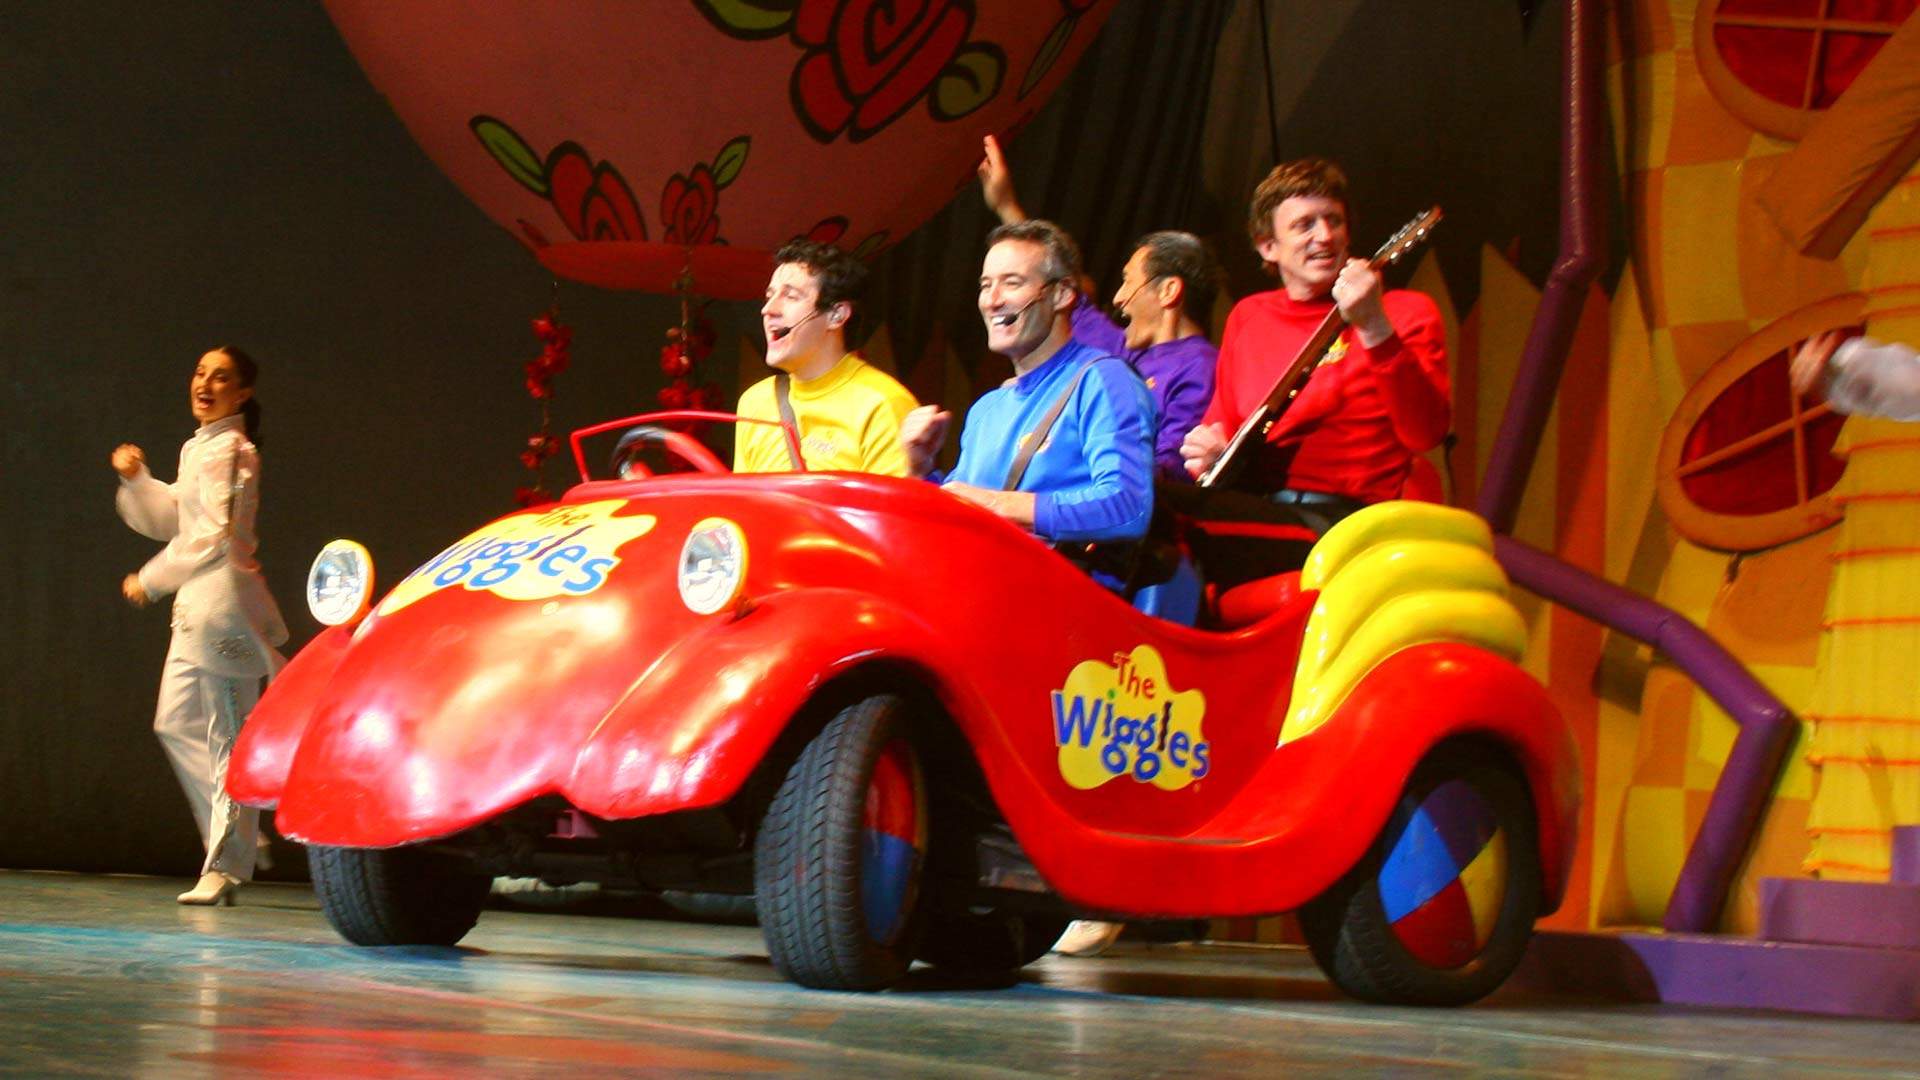 Prime Video Is Bringing a Documentary About The Wiggles to Your